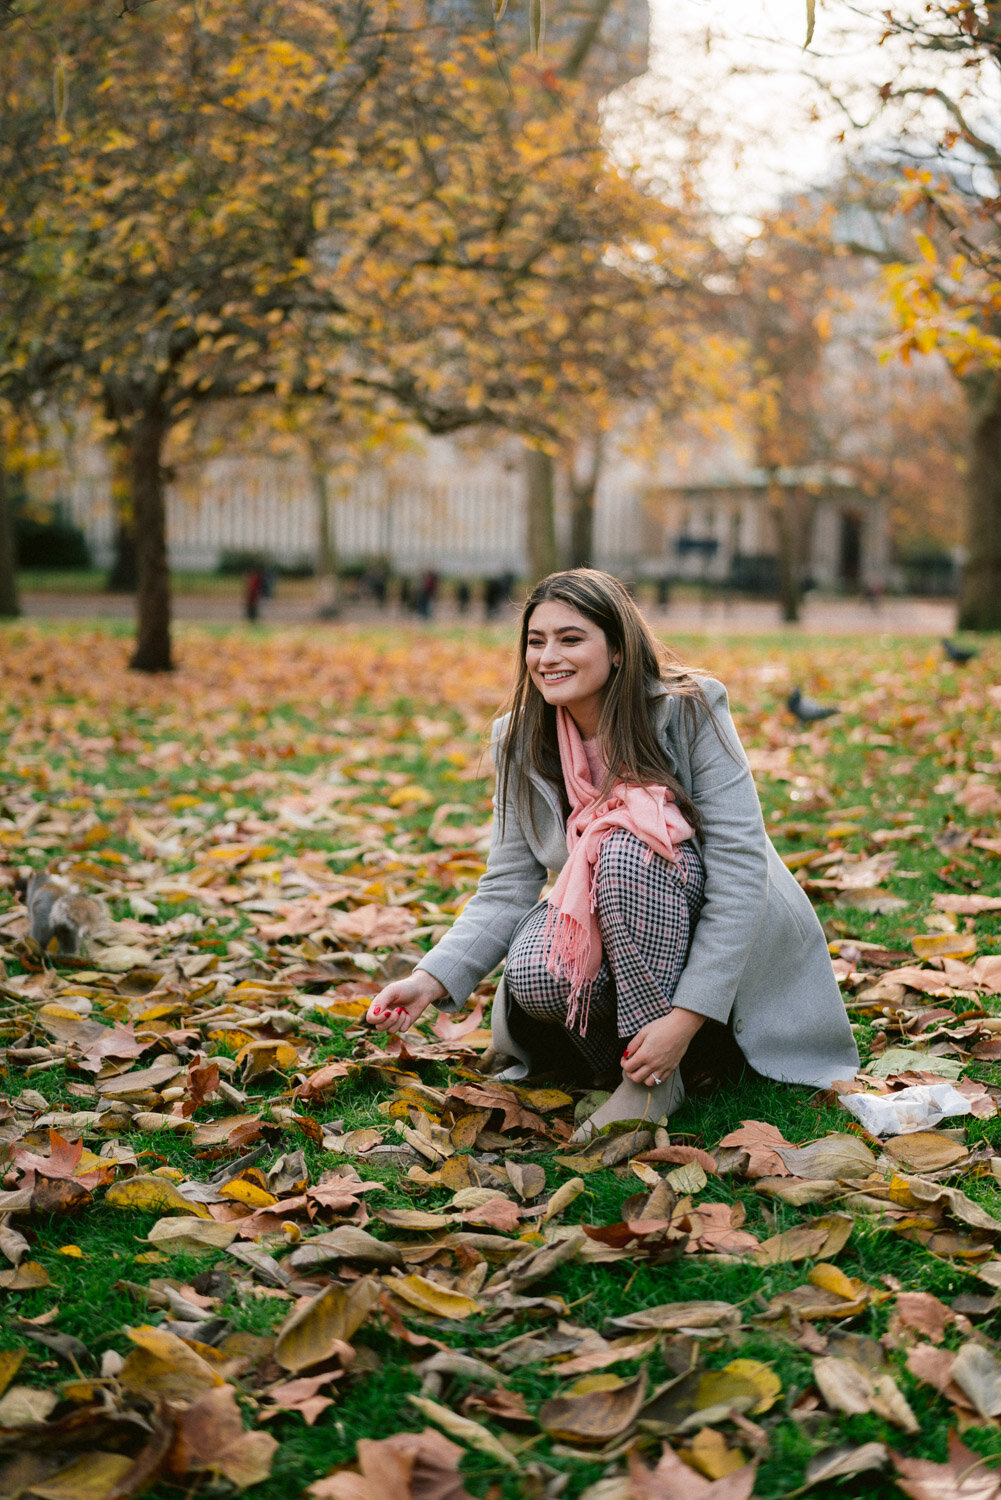 Surprise proposal photographer in London